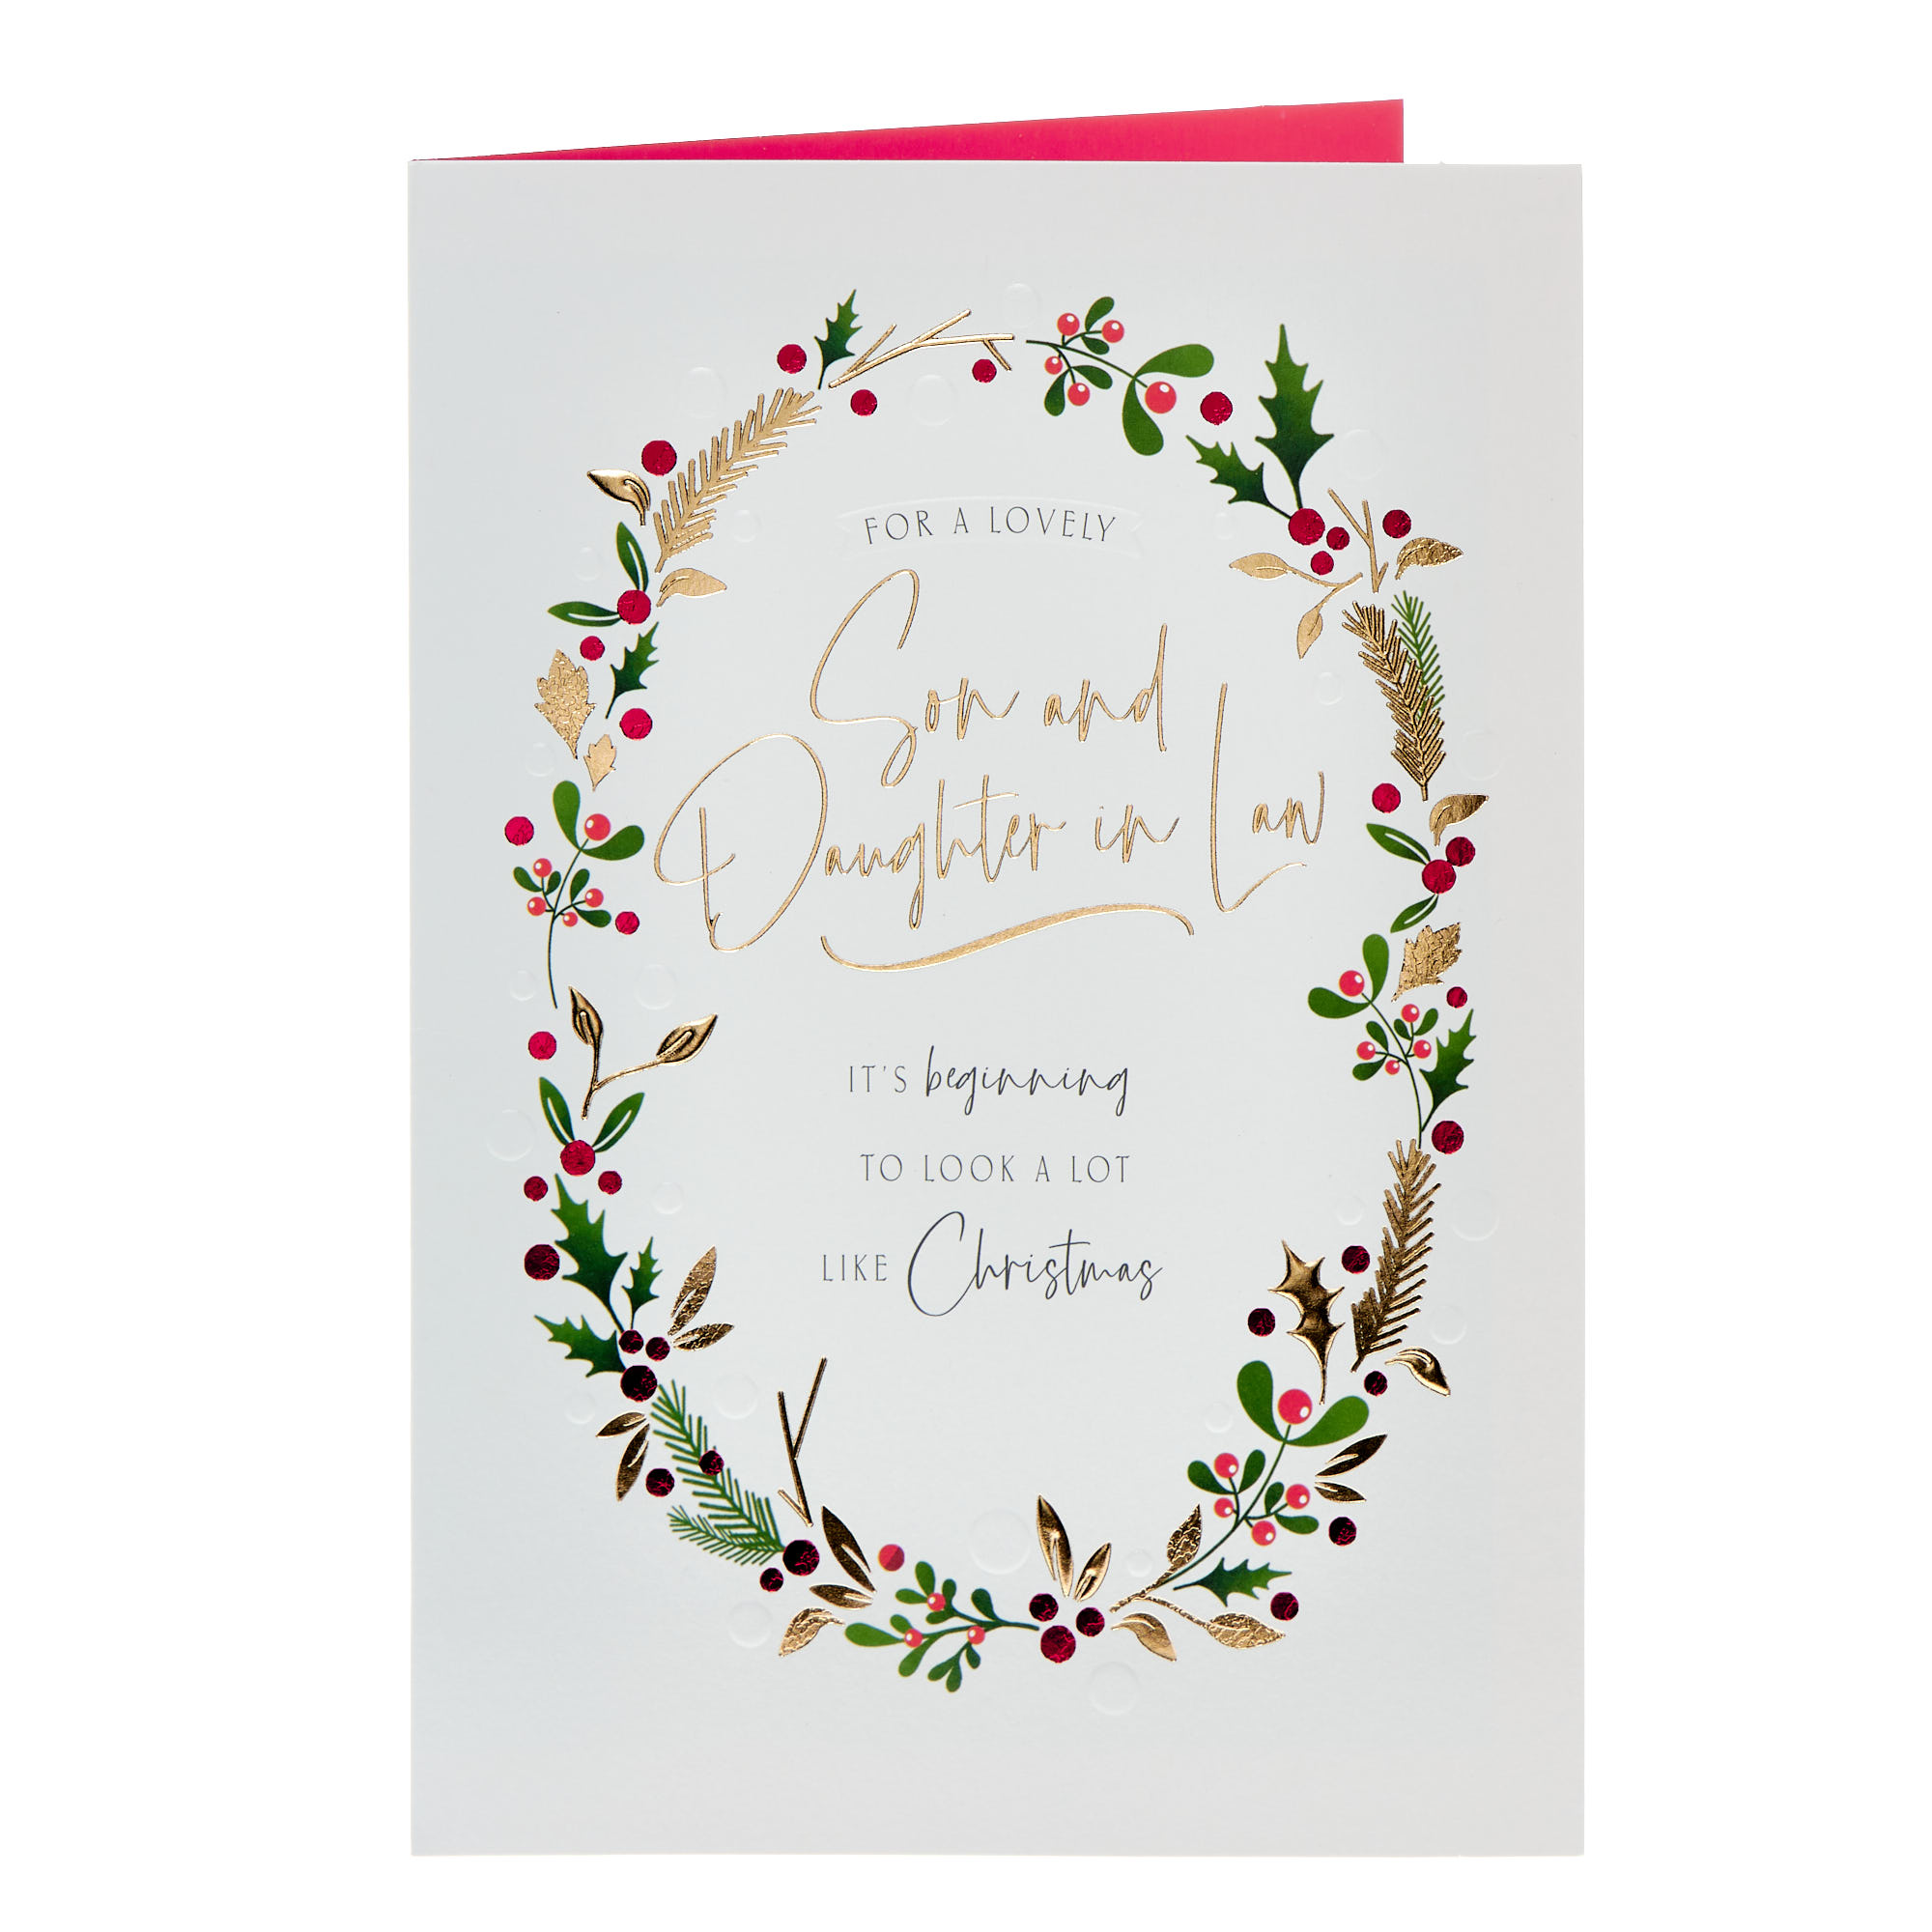 Son & Daughter In Law Holly Wreath Christmas Card